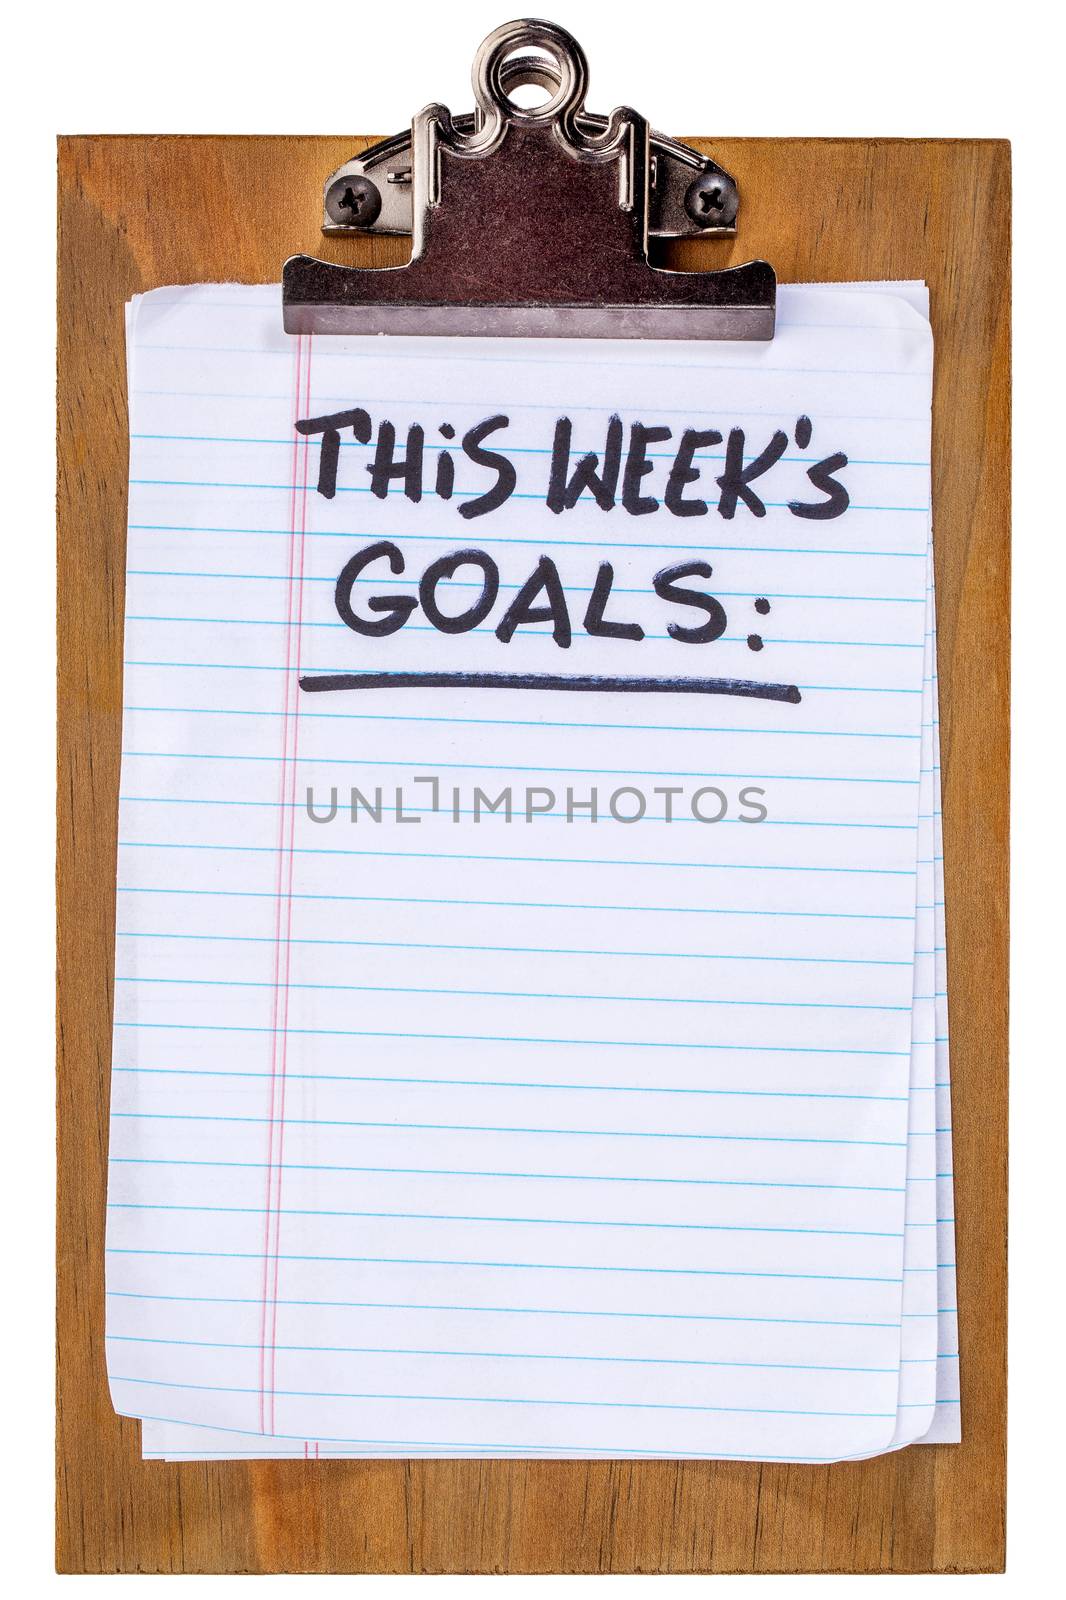 this week goals on clipbaord by PixelsAway